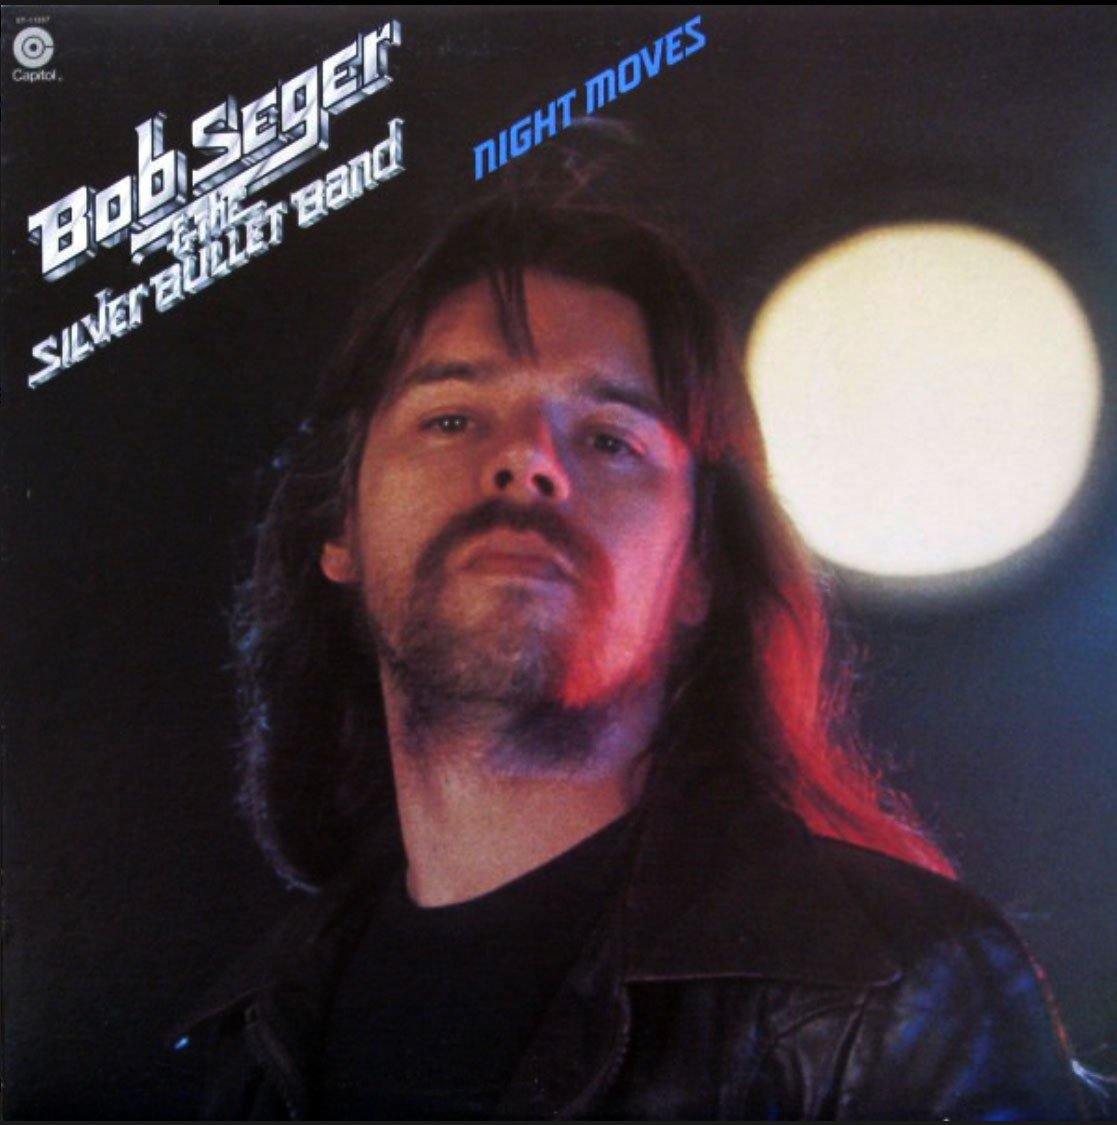 BOB SEGER AND THE SILVER BULLET BAND ‎–  Night Moves - VinylPursuit.com